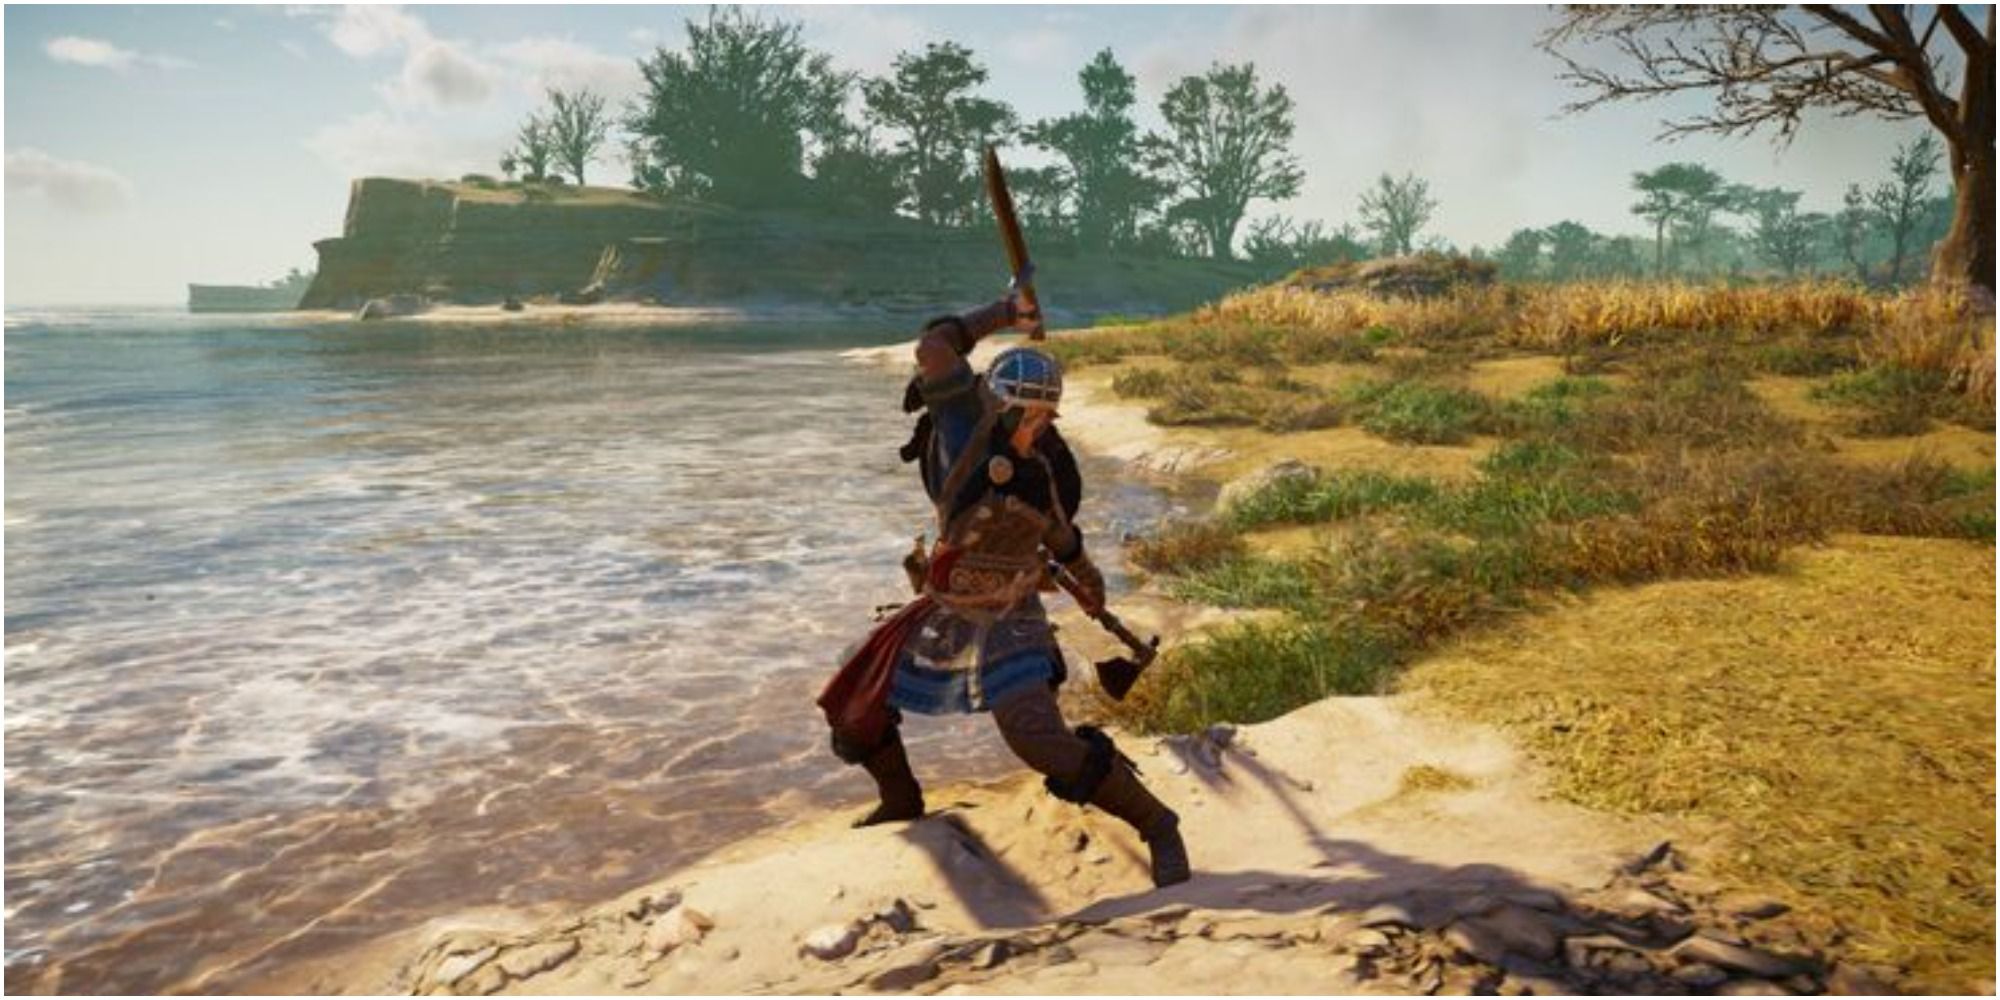 Assassin's Creed Valhalla Eivor Using A Dagger And An Axe